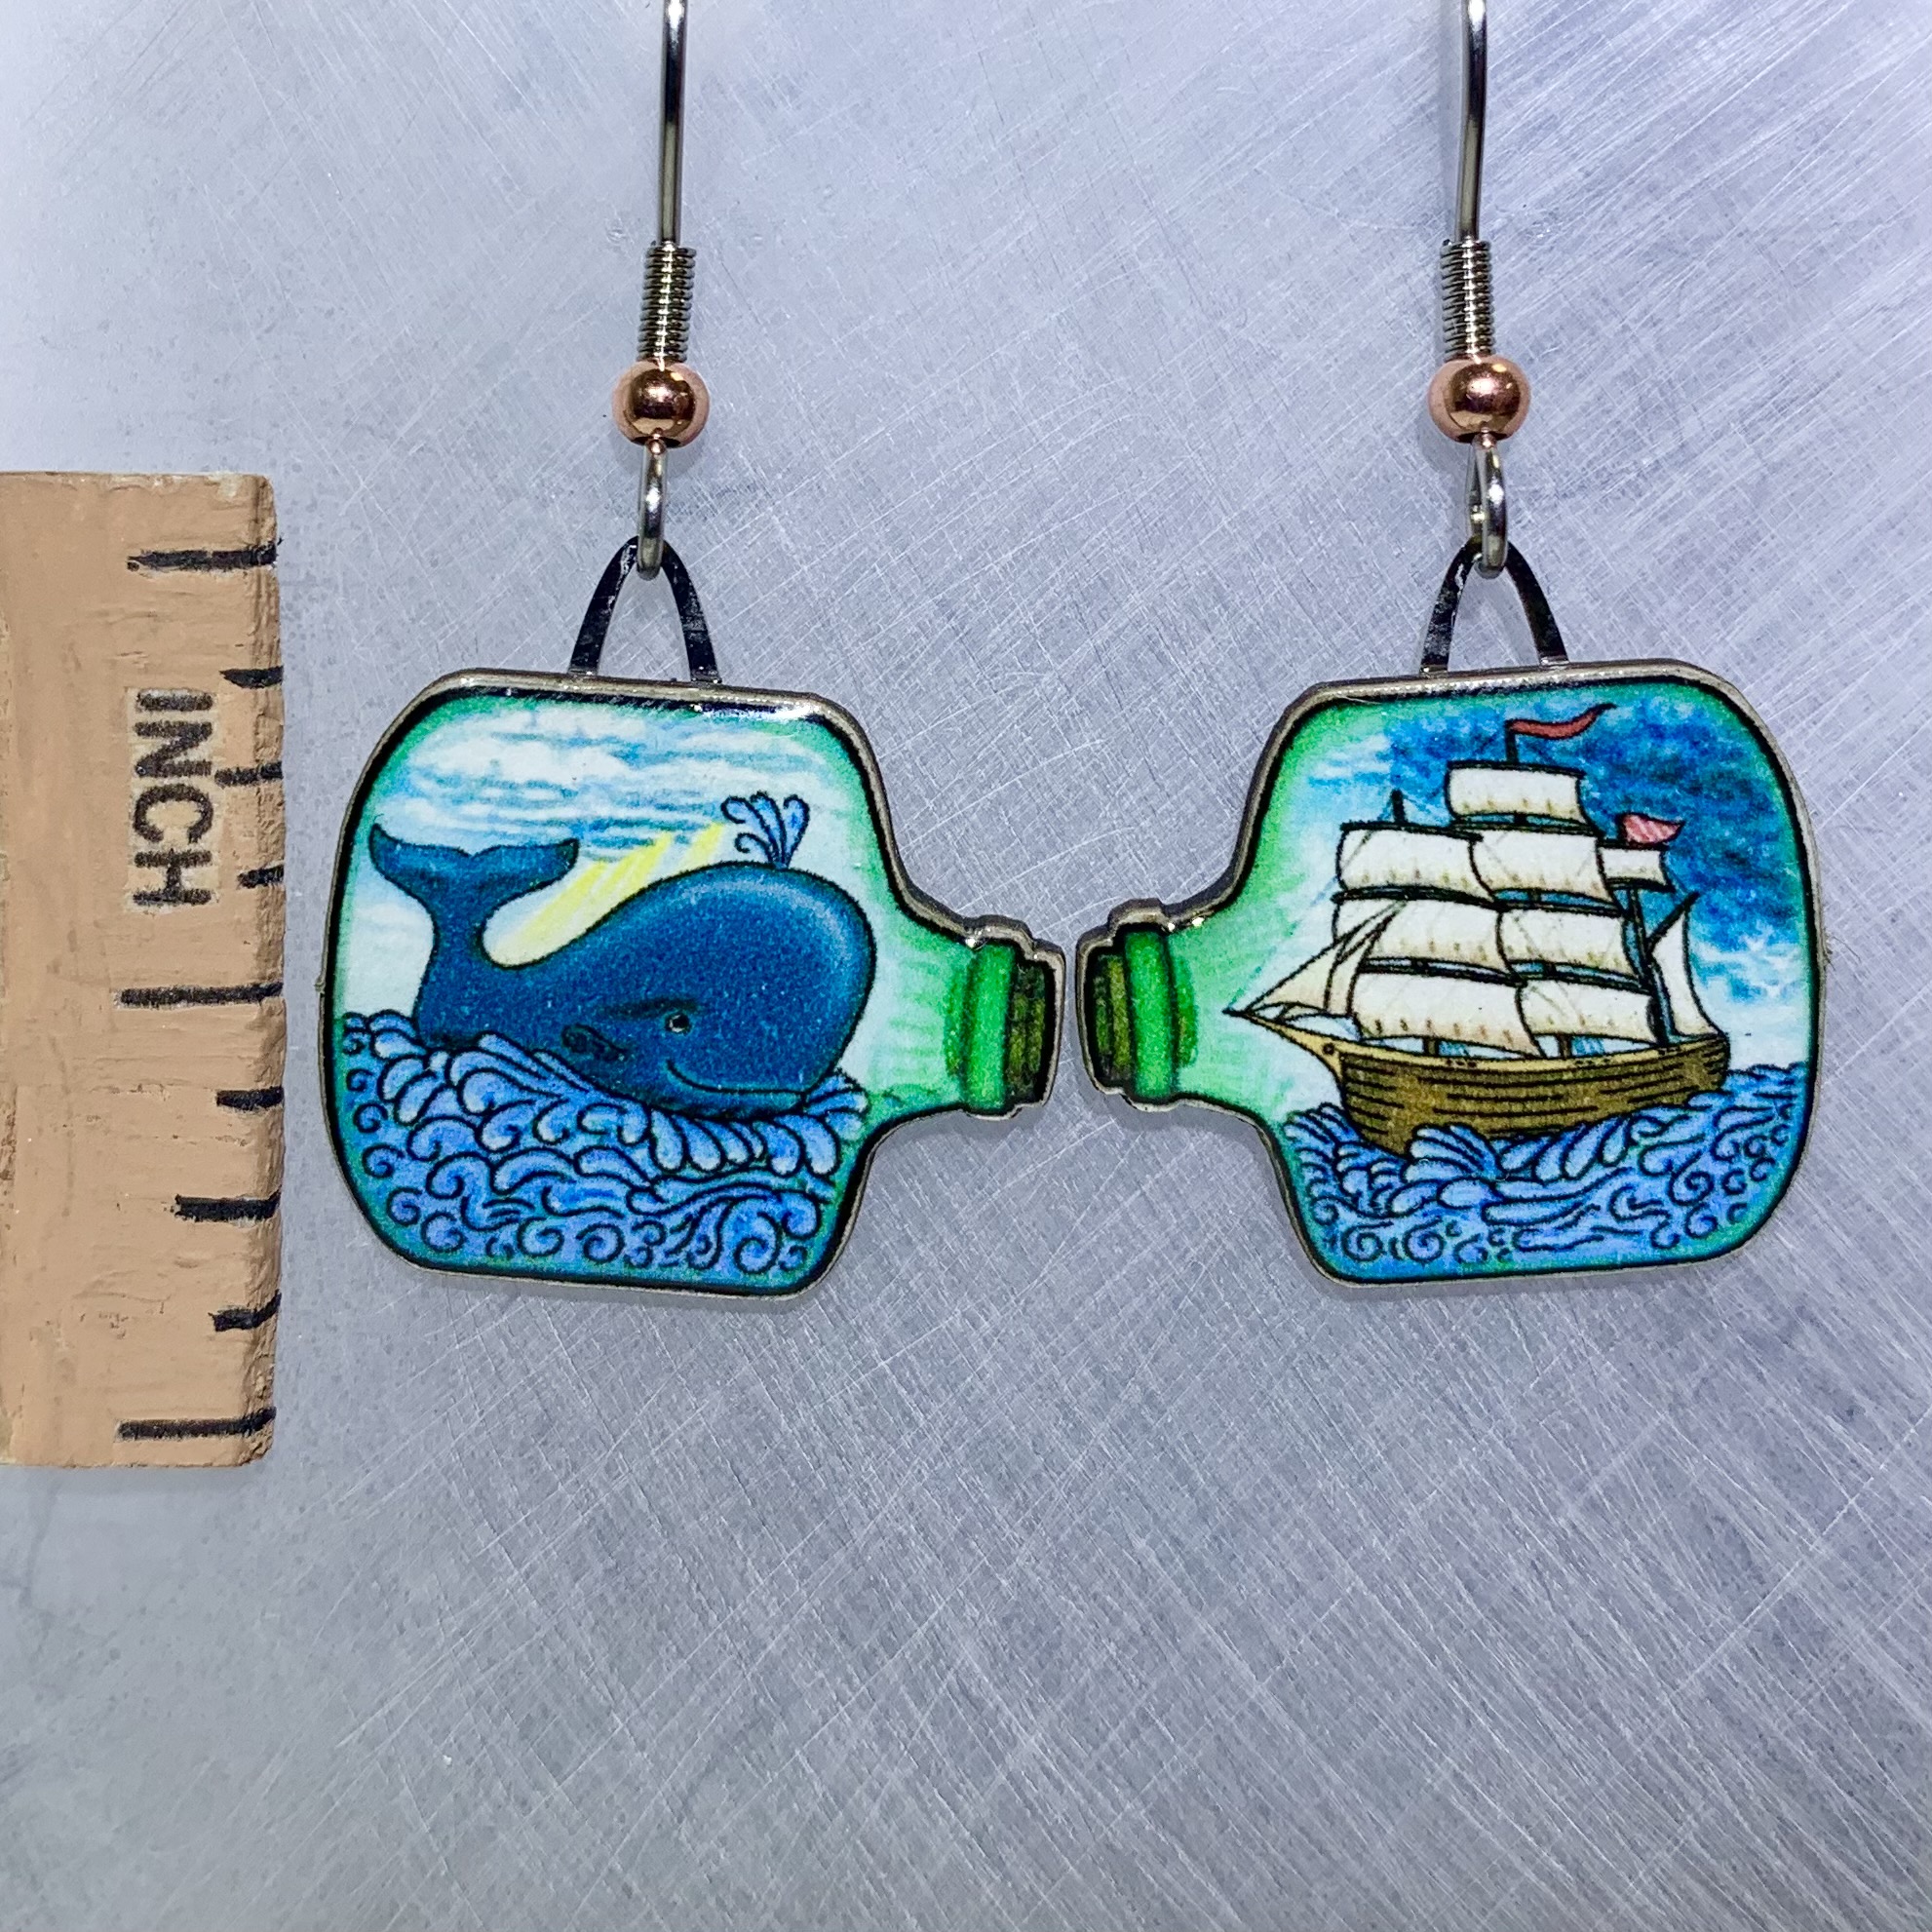 Picture shown is of 1 inch tall pair of earrings of a Whale and a Ship in a bottle.